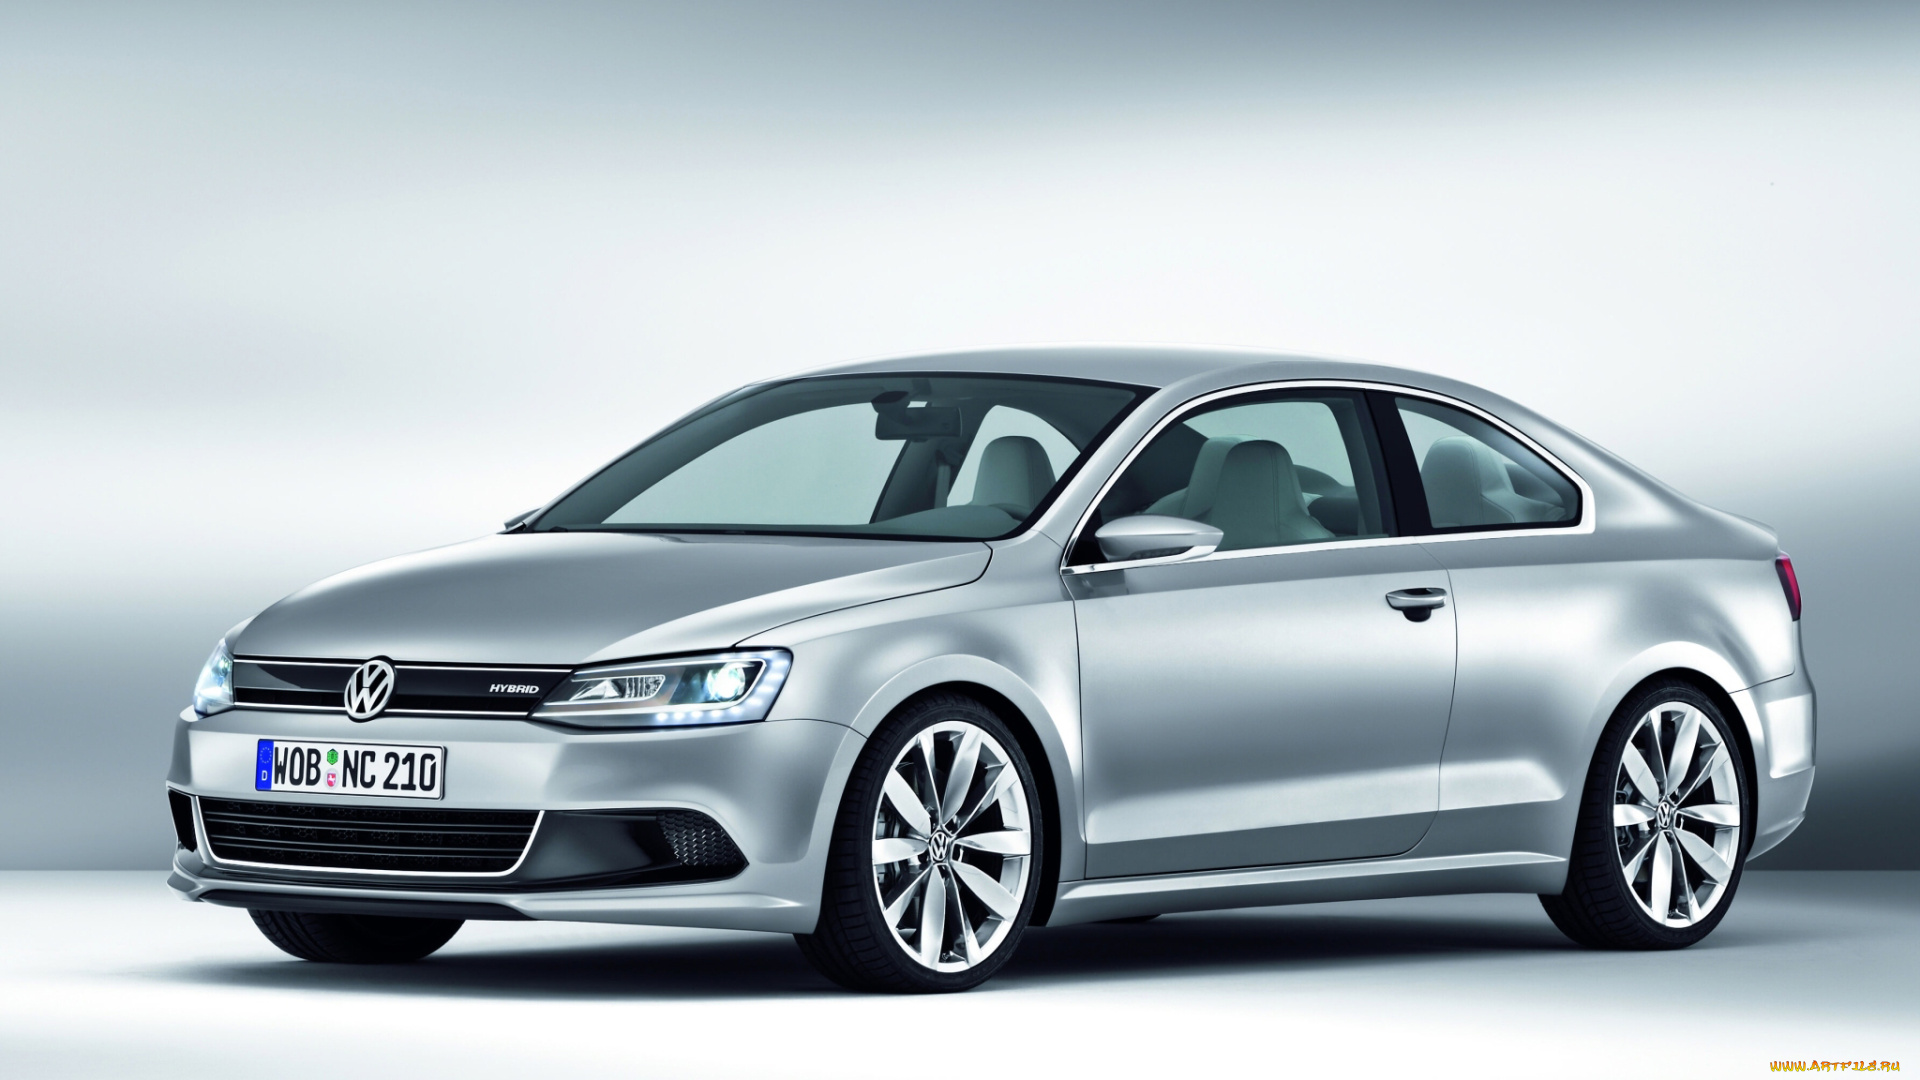 volkswagen, new, compact, coupe, concept, 2010, автомобили, volkswagen, concept, coupe, compact, new, 2010